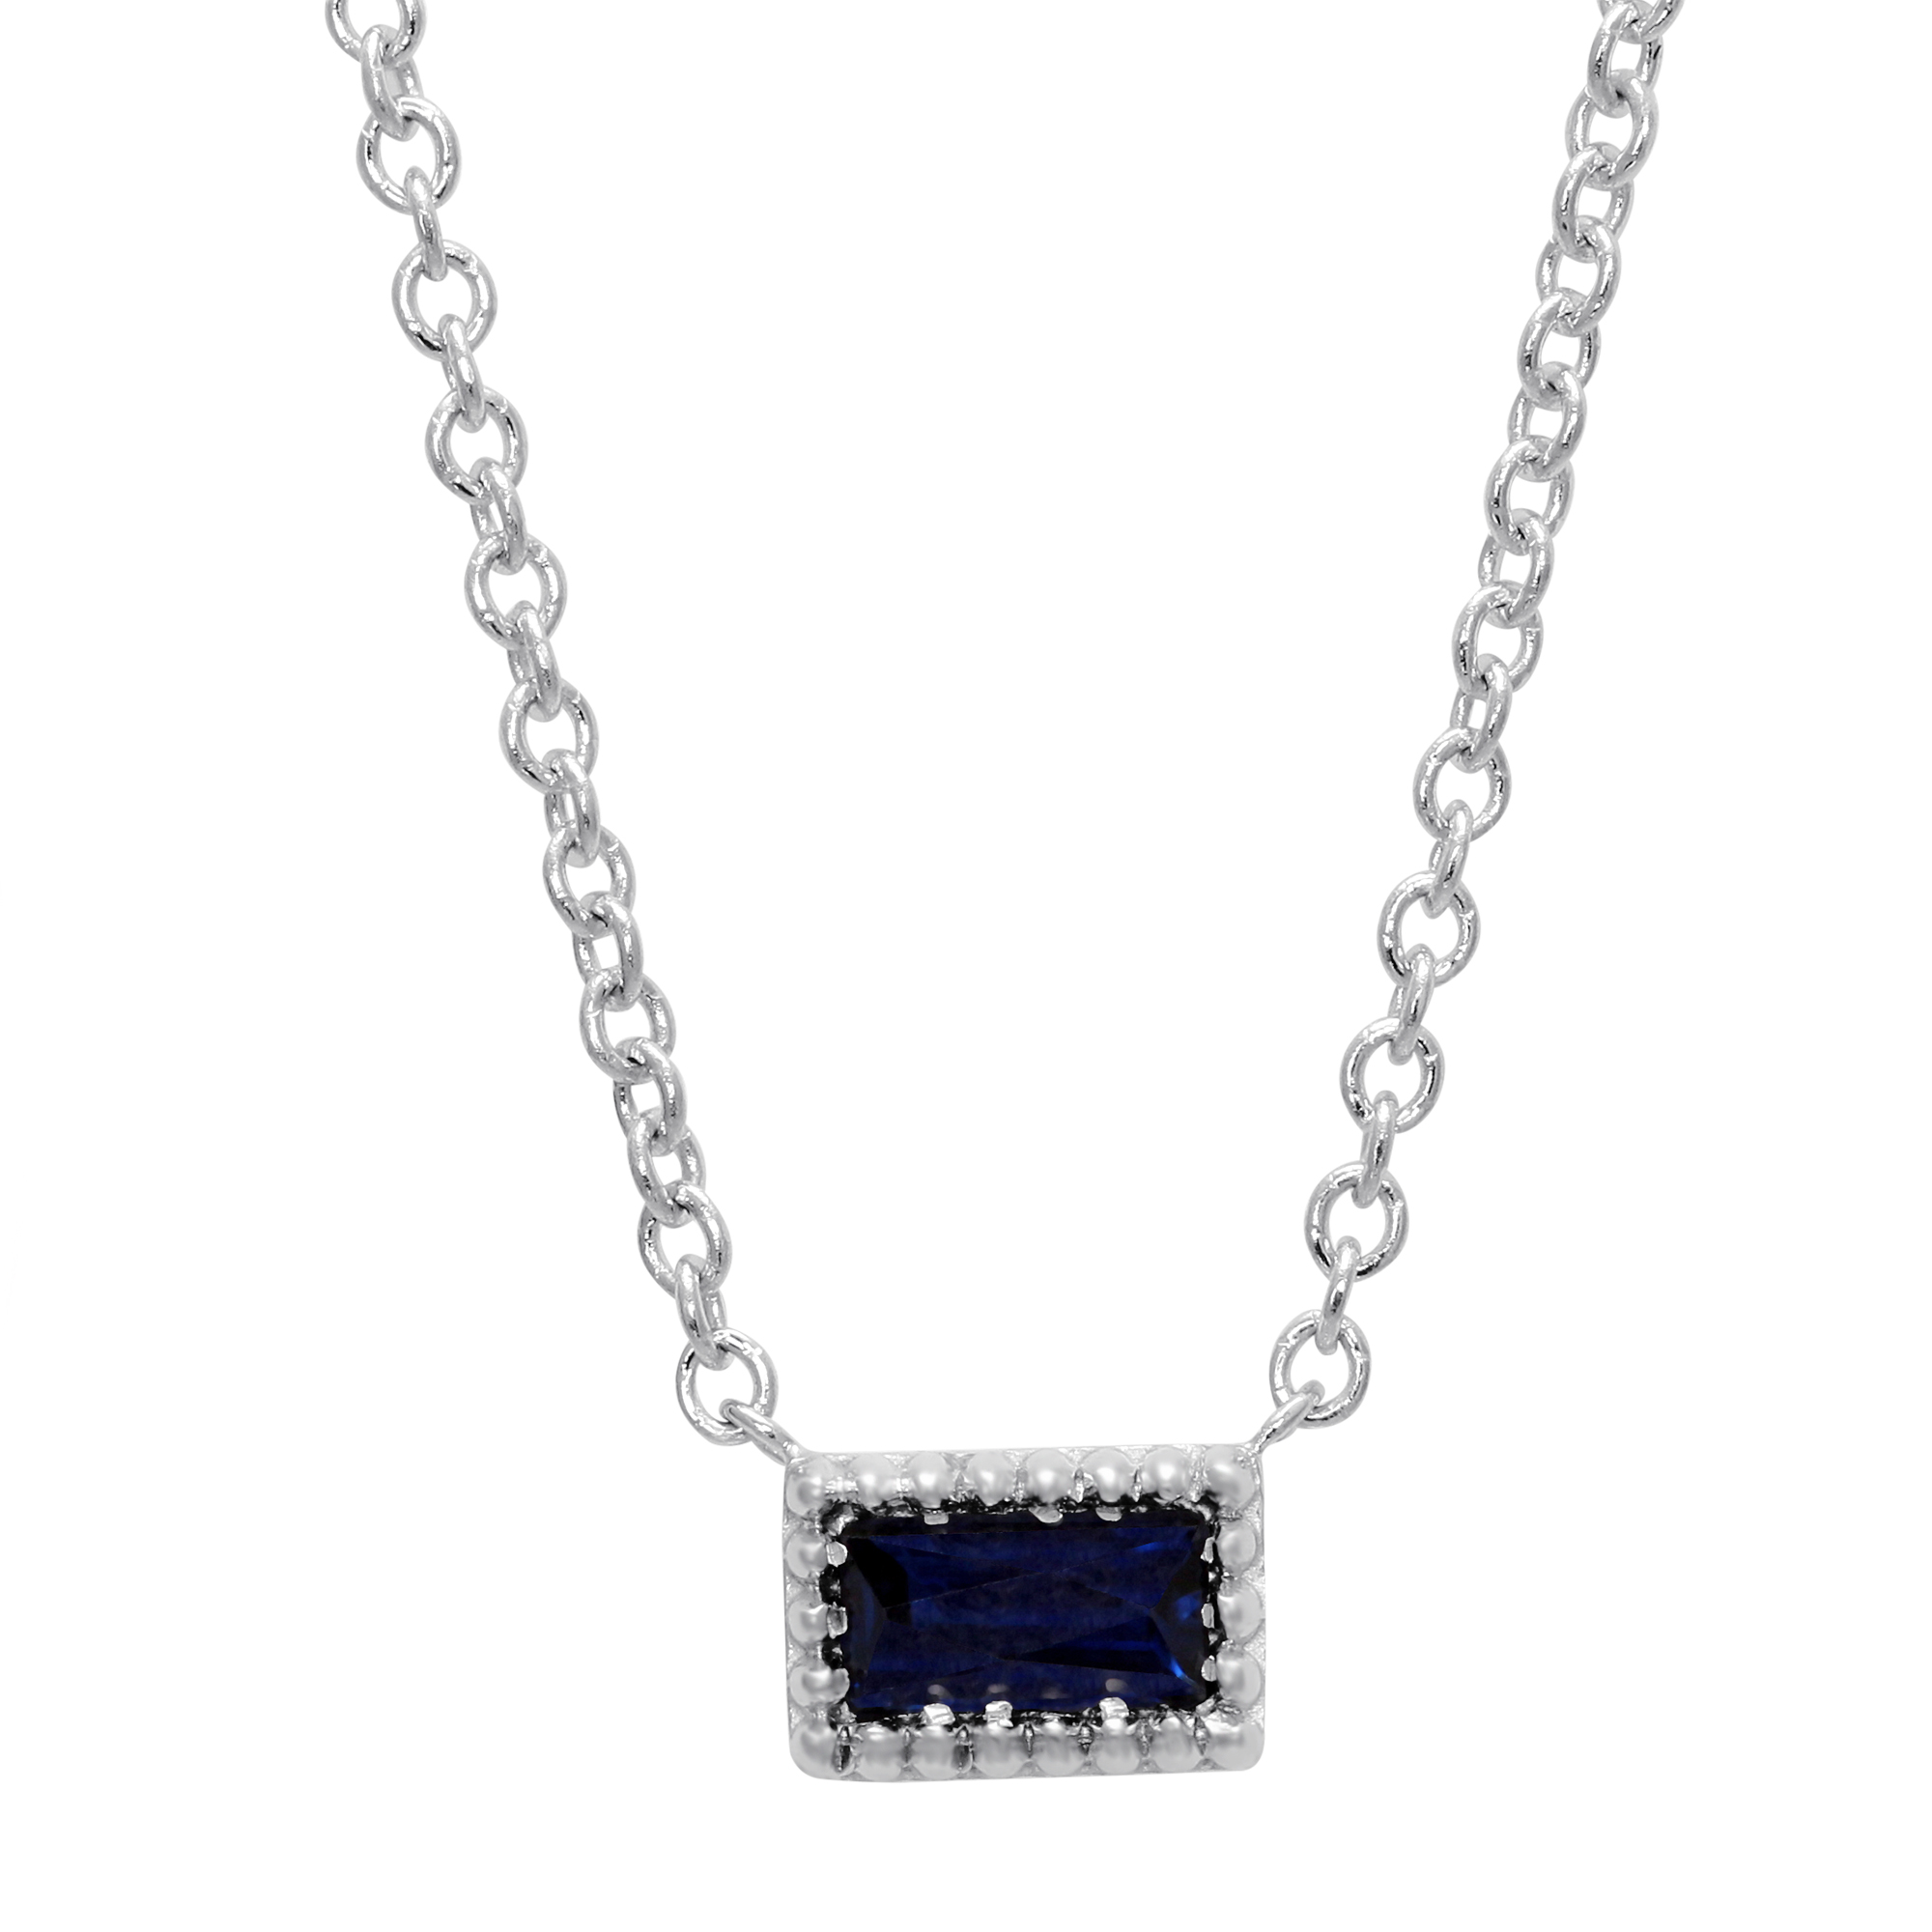 My Story 14K White Gold Baguette Sapphire Necklace, 18